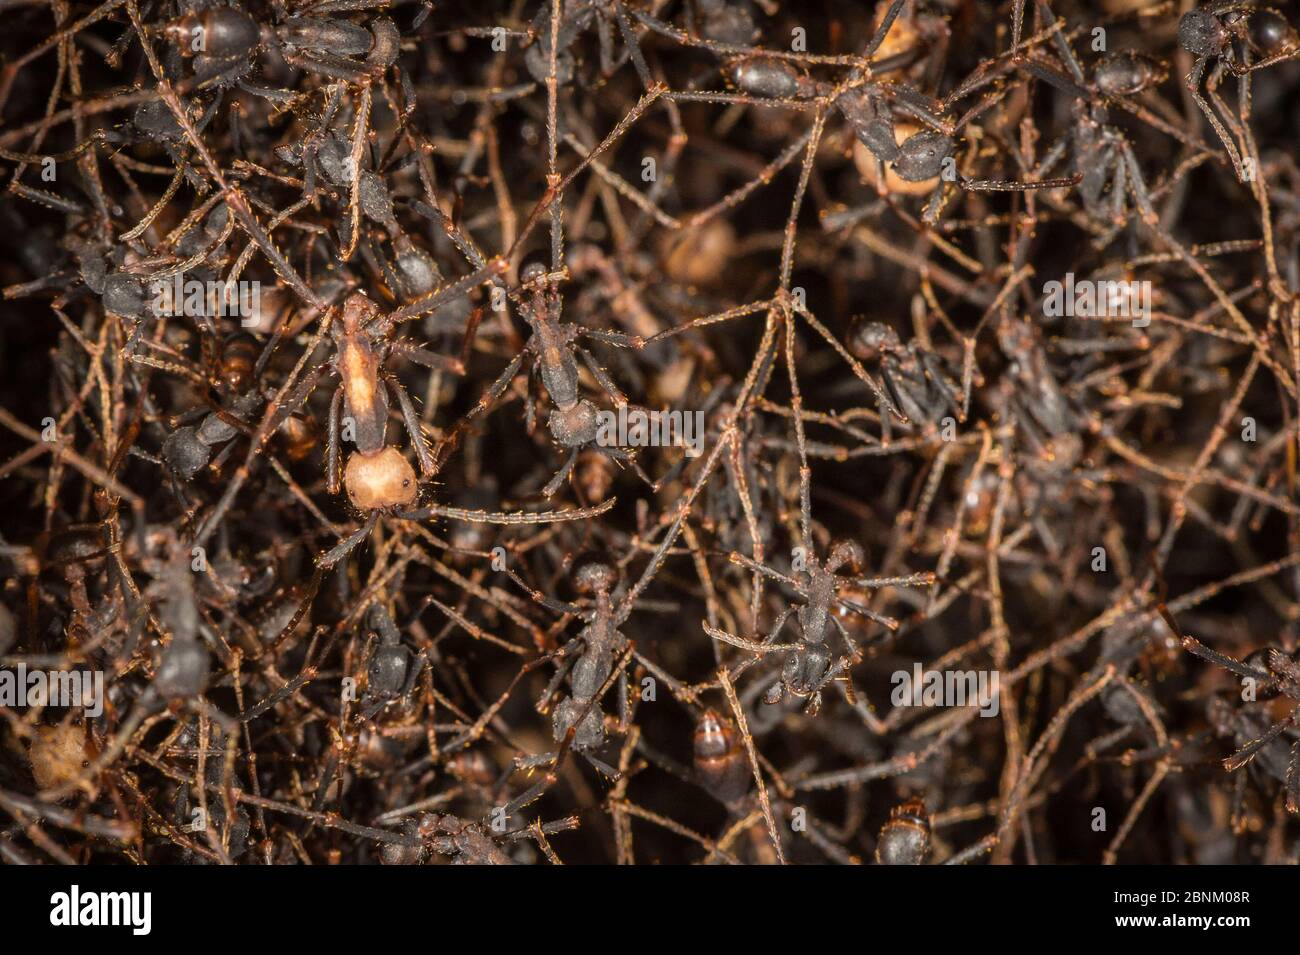 Army ants (Eciton sp.) formed into bivouac, Costa Rica. February 2015. Stock Photo